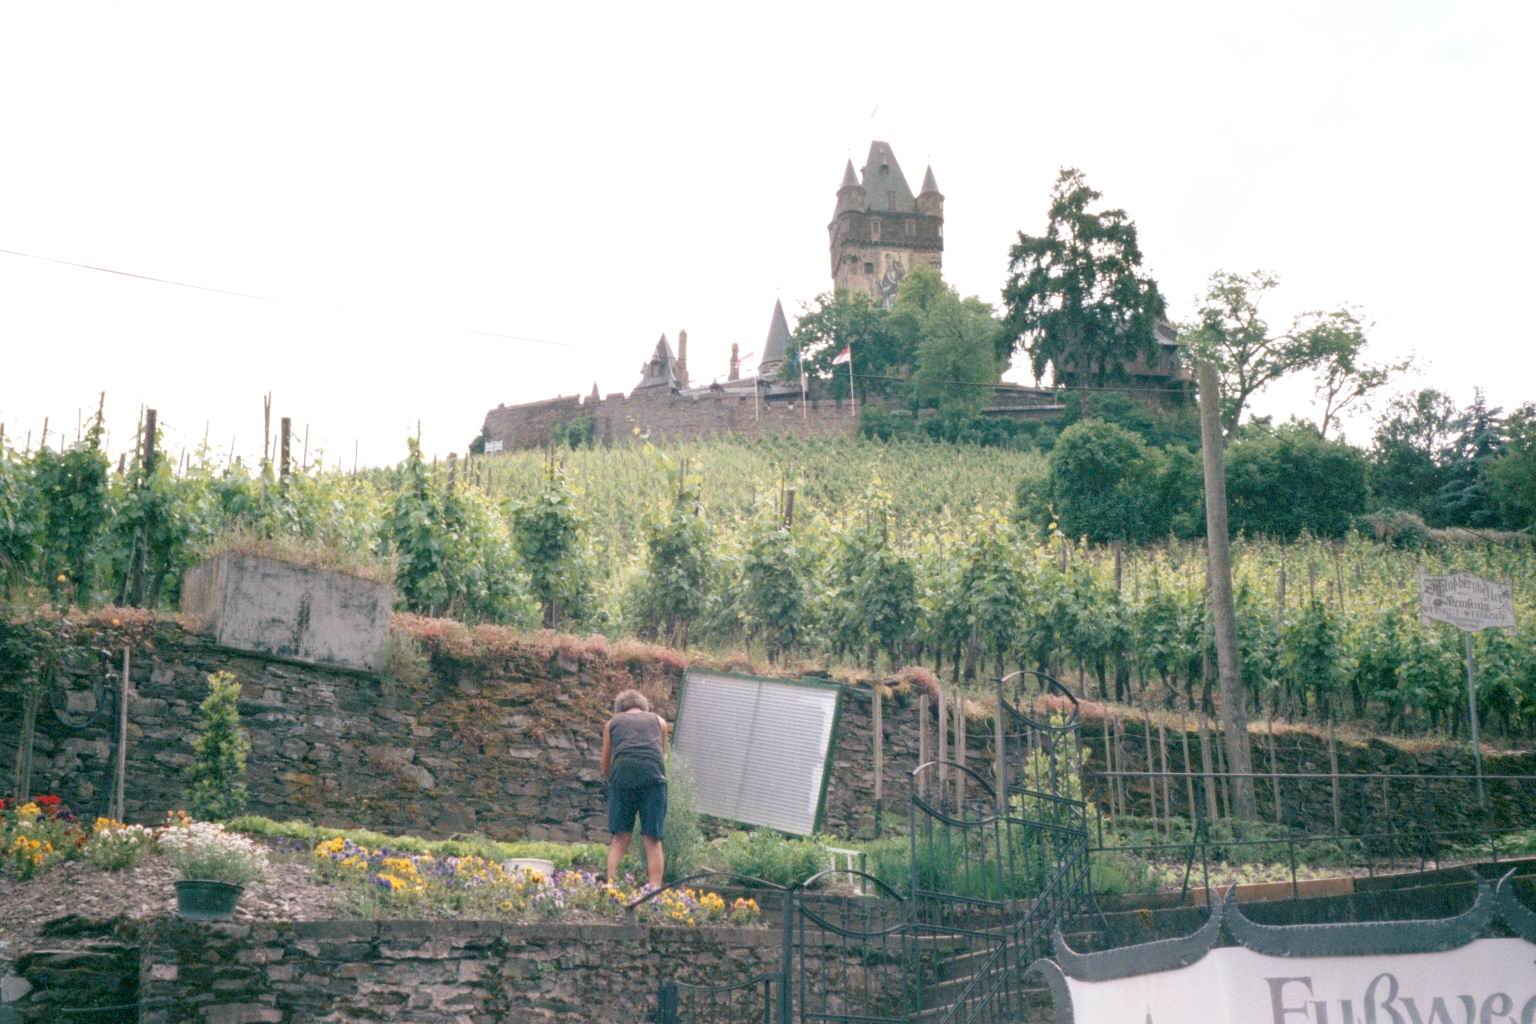 Wine grapes growing on the hill up to the castle